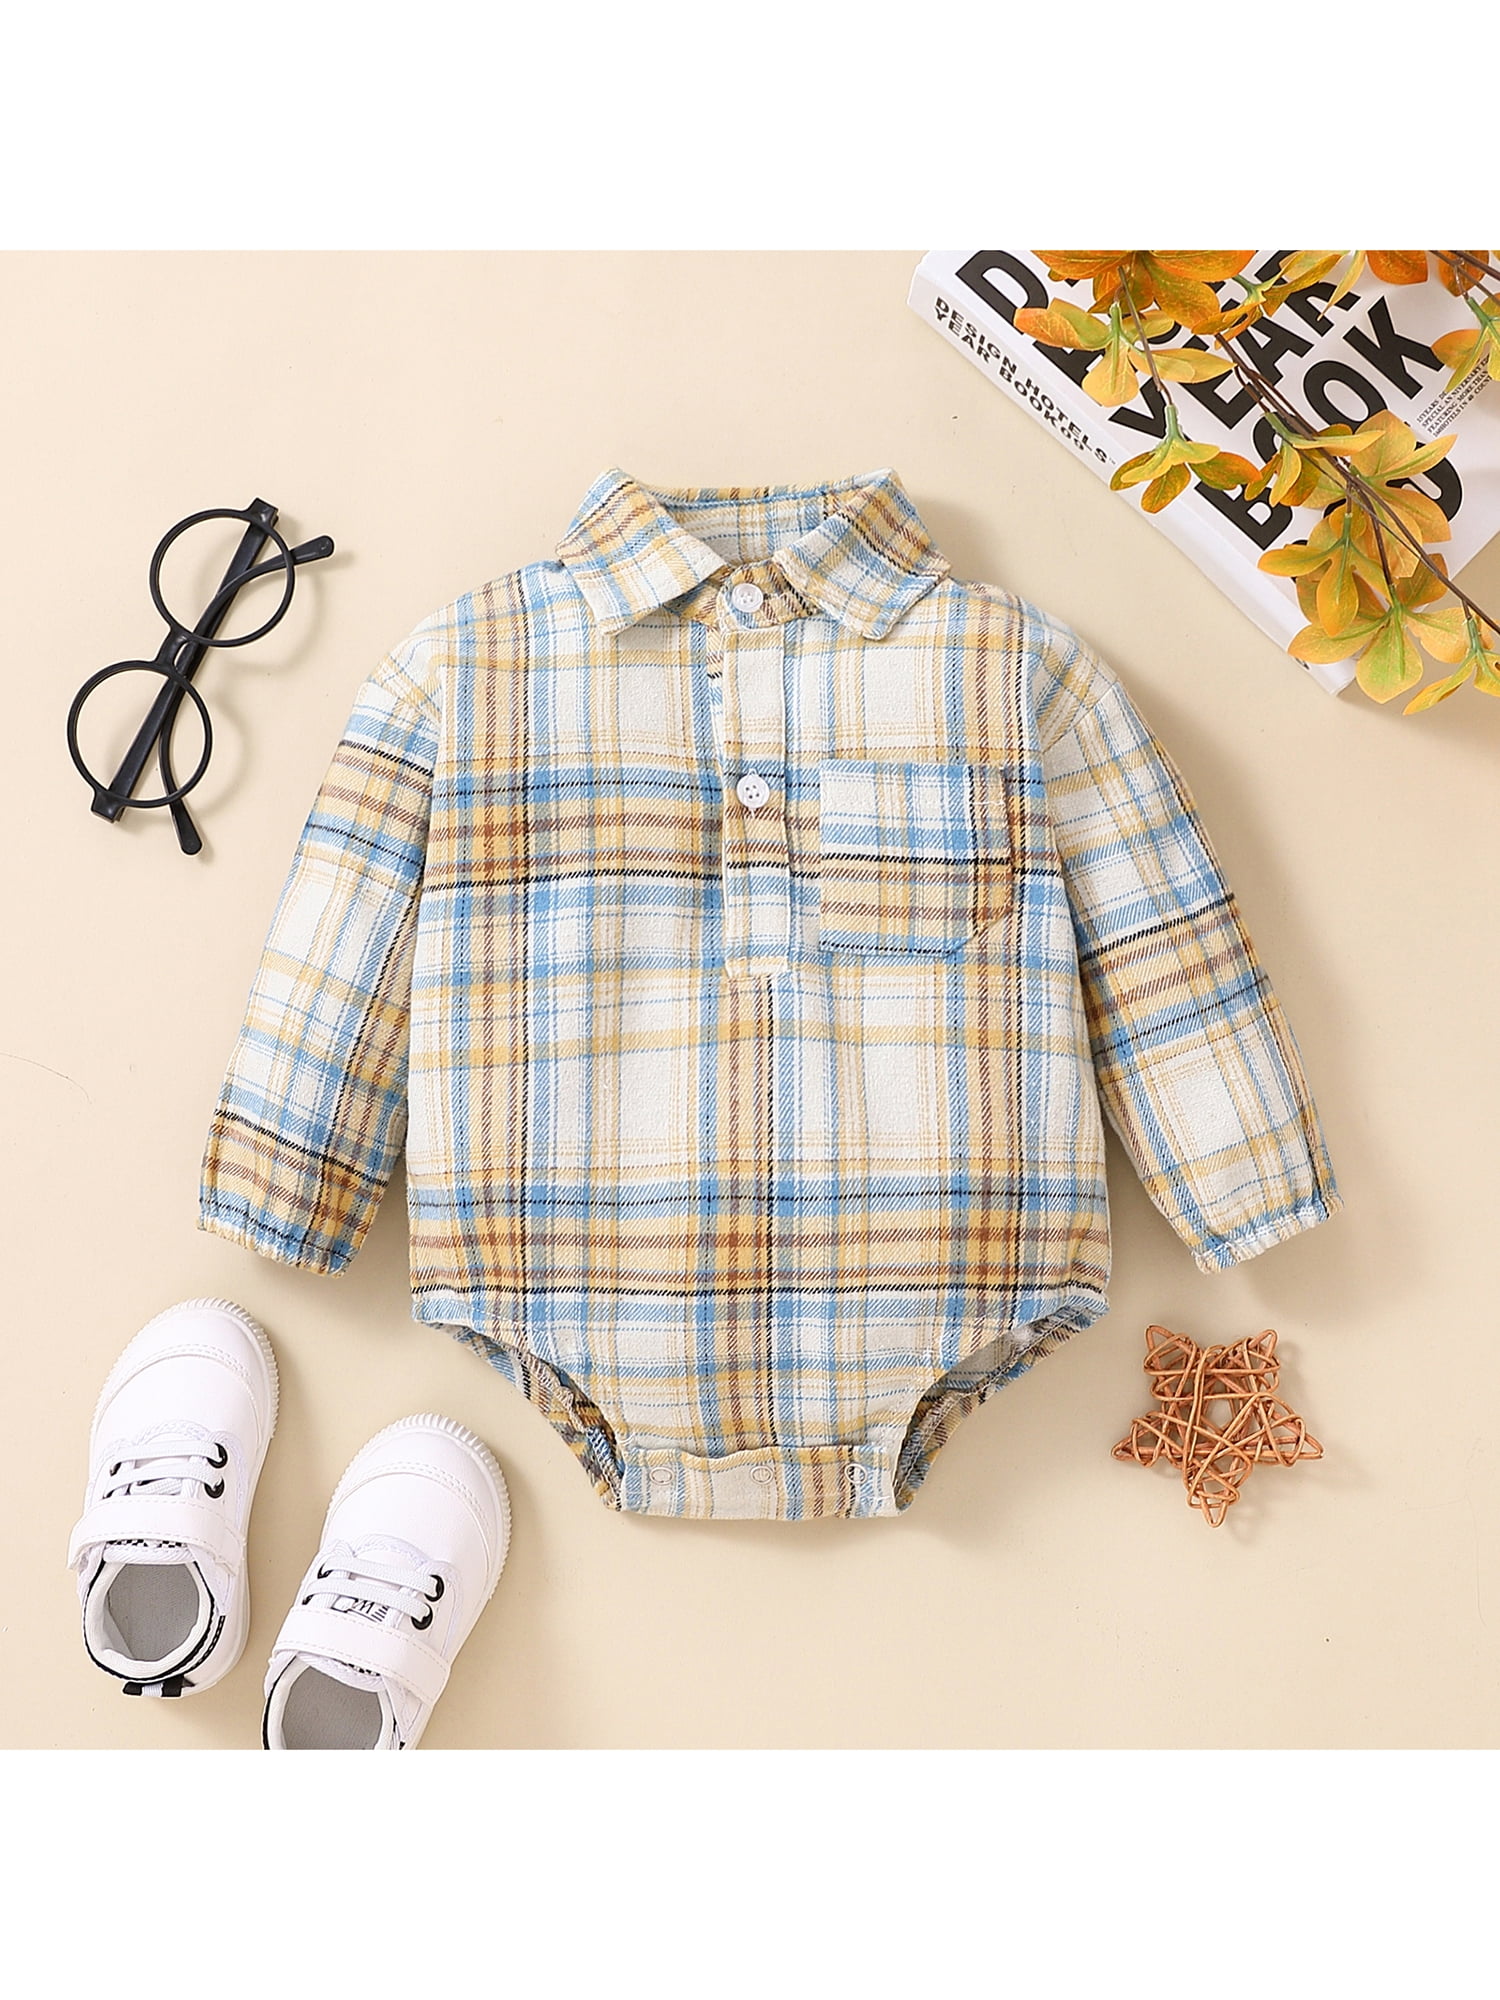 Canrulo Infant Baby Boy Plaid Shirt Romper Long Sleeve Button Down Flannel  Bodysuit Top Kids Fall Winter Clothes Brown 18-24 Months 